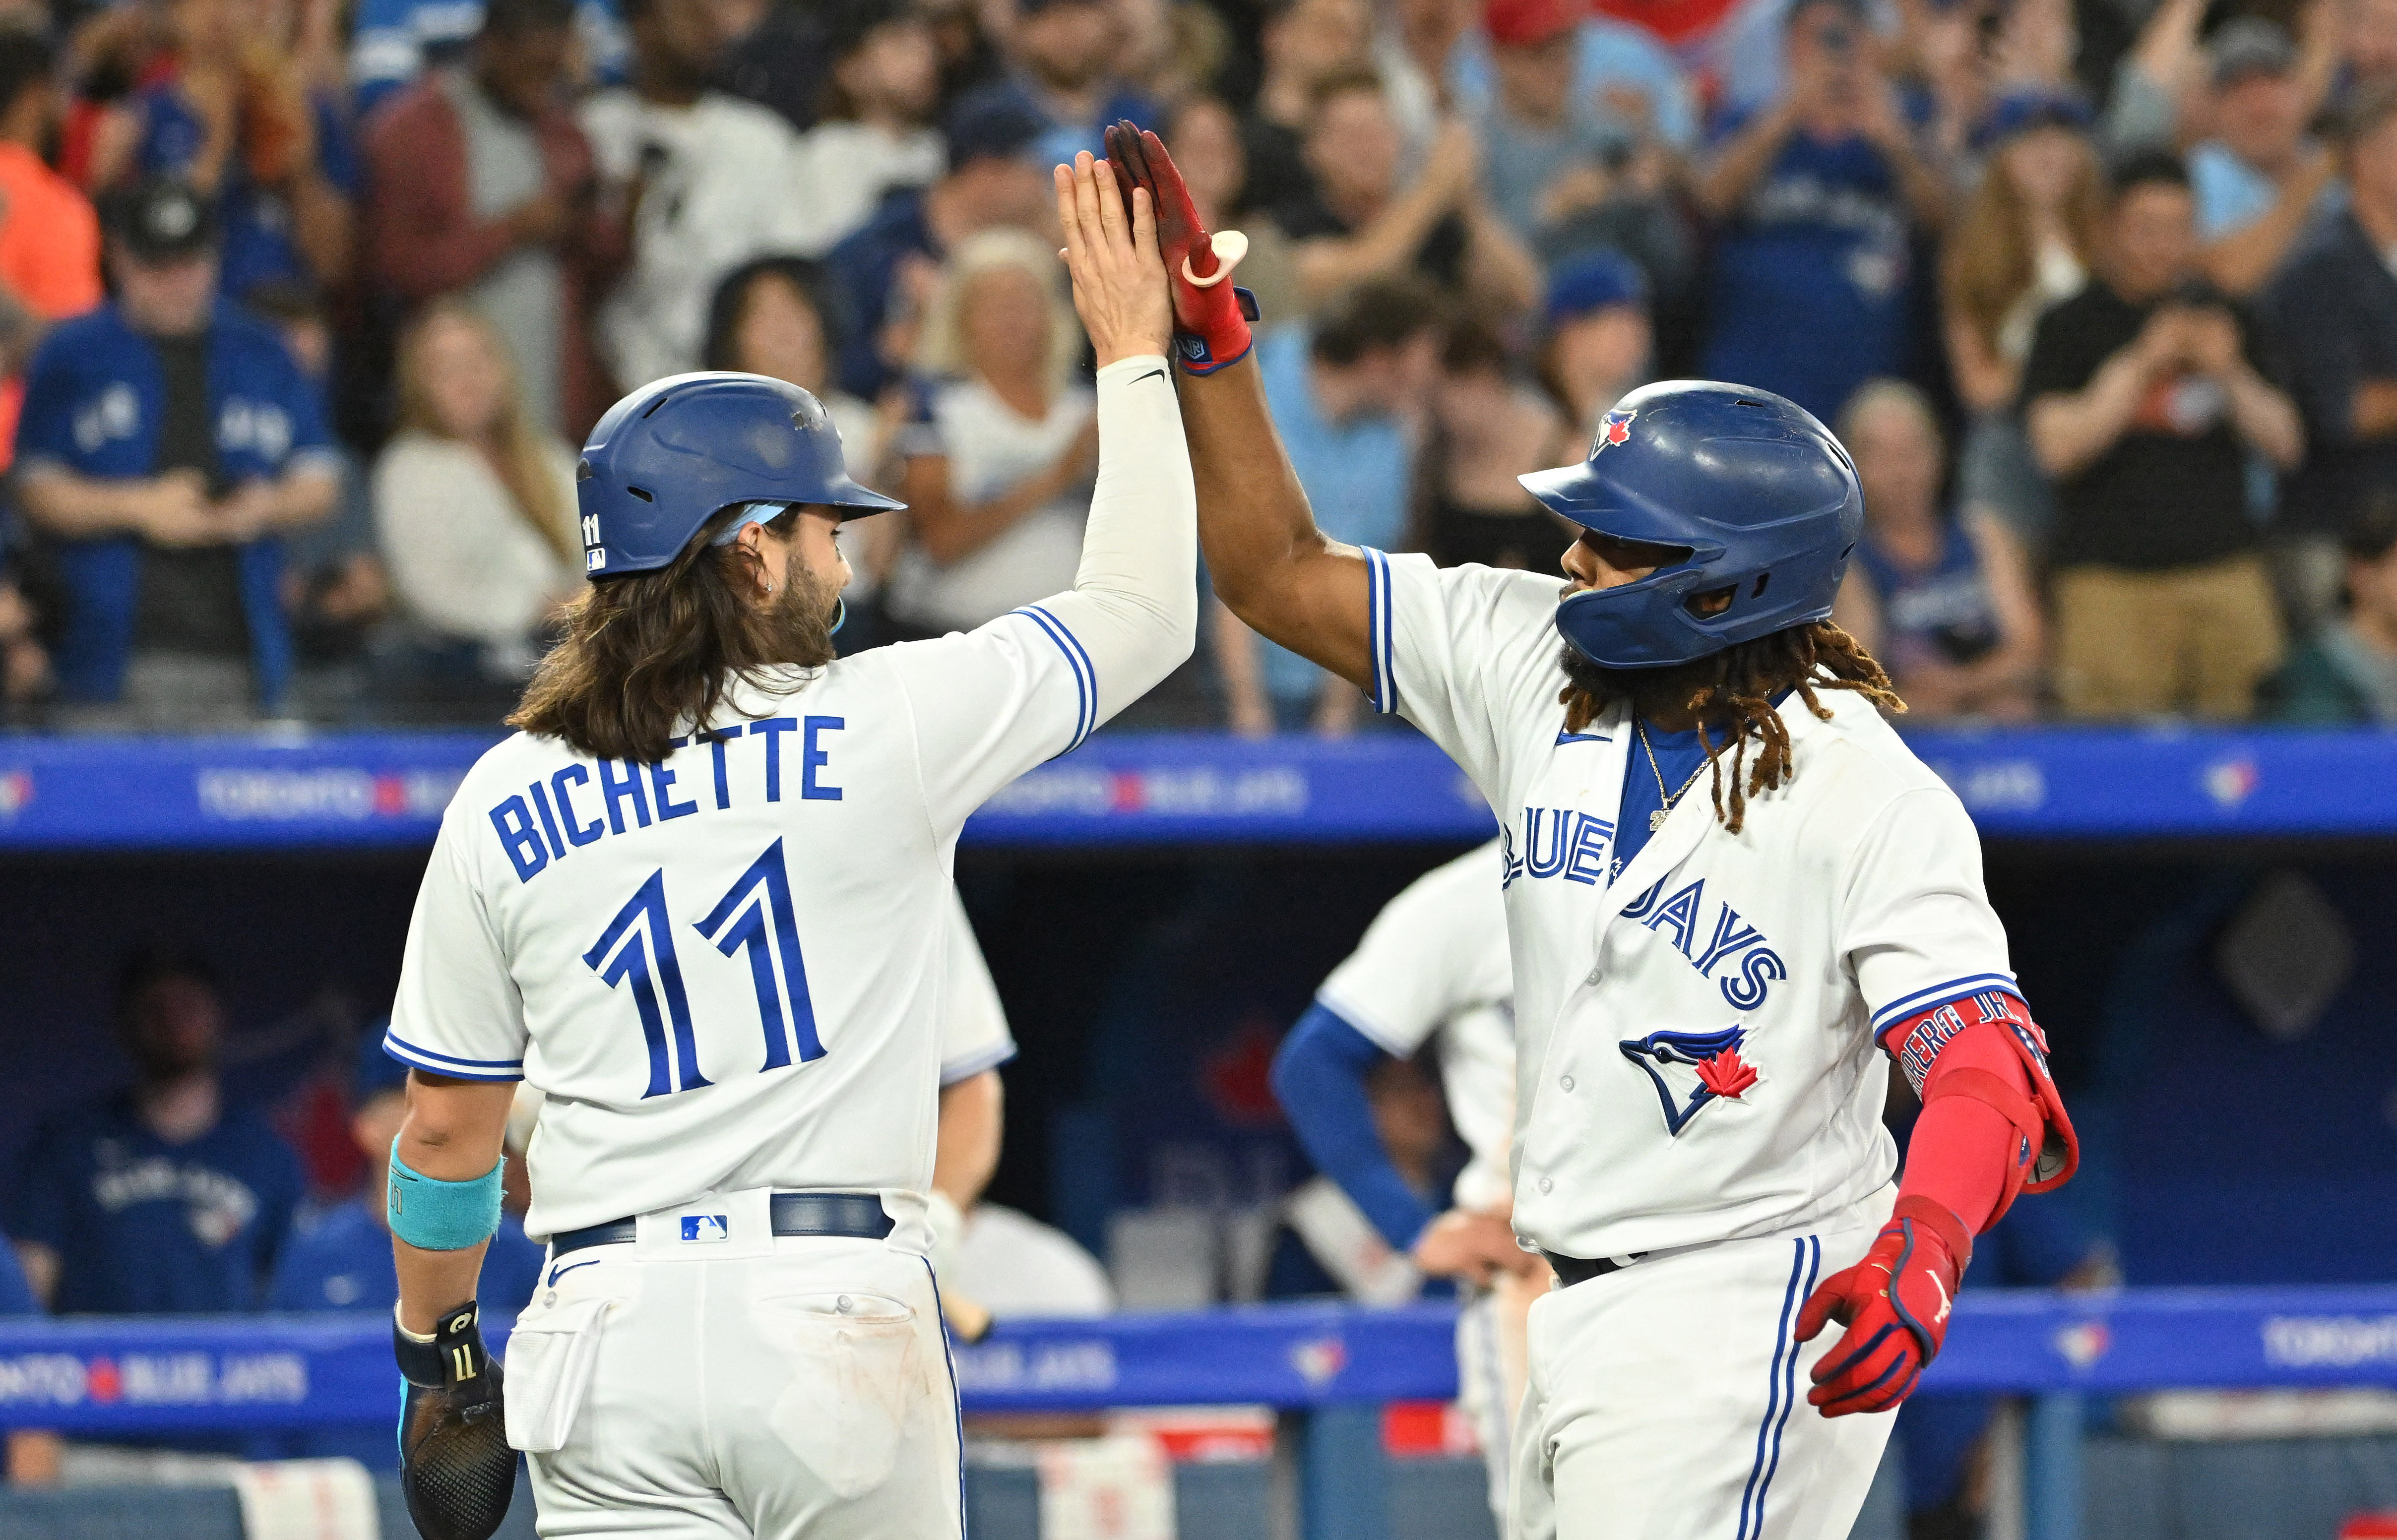 Langeliers hits game-winning HR in 9th as A's beat Blue Jays 5-4